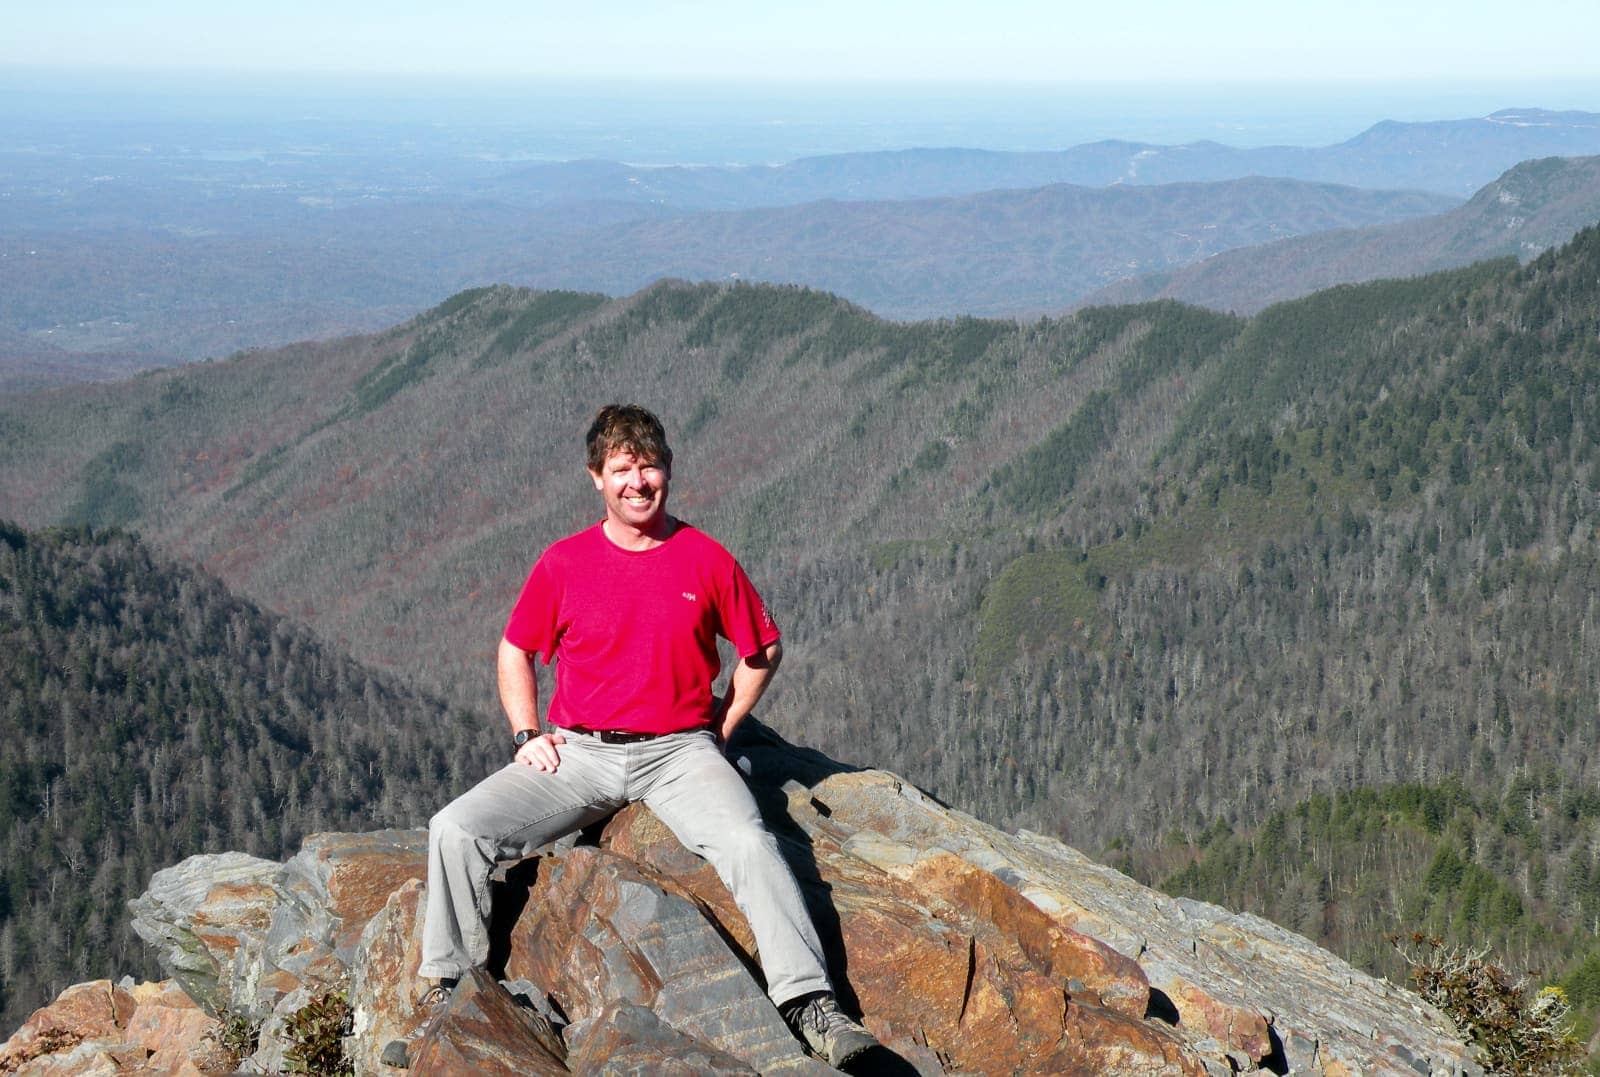 Man in red shirt smiling while sitting on rock